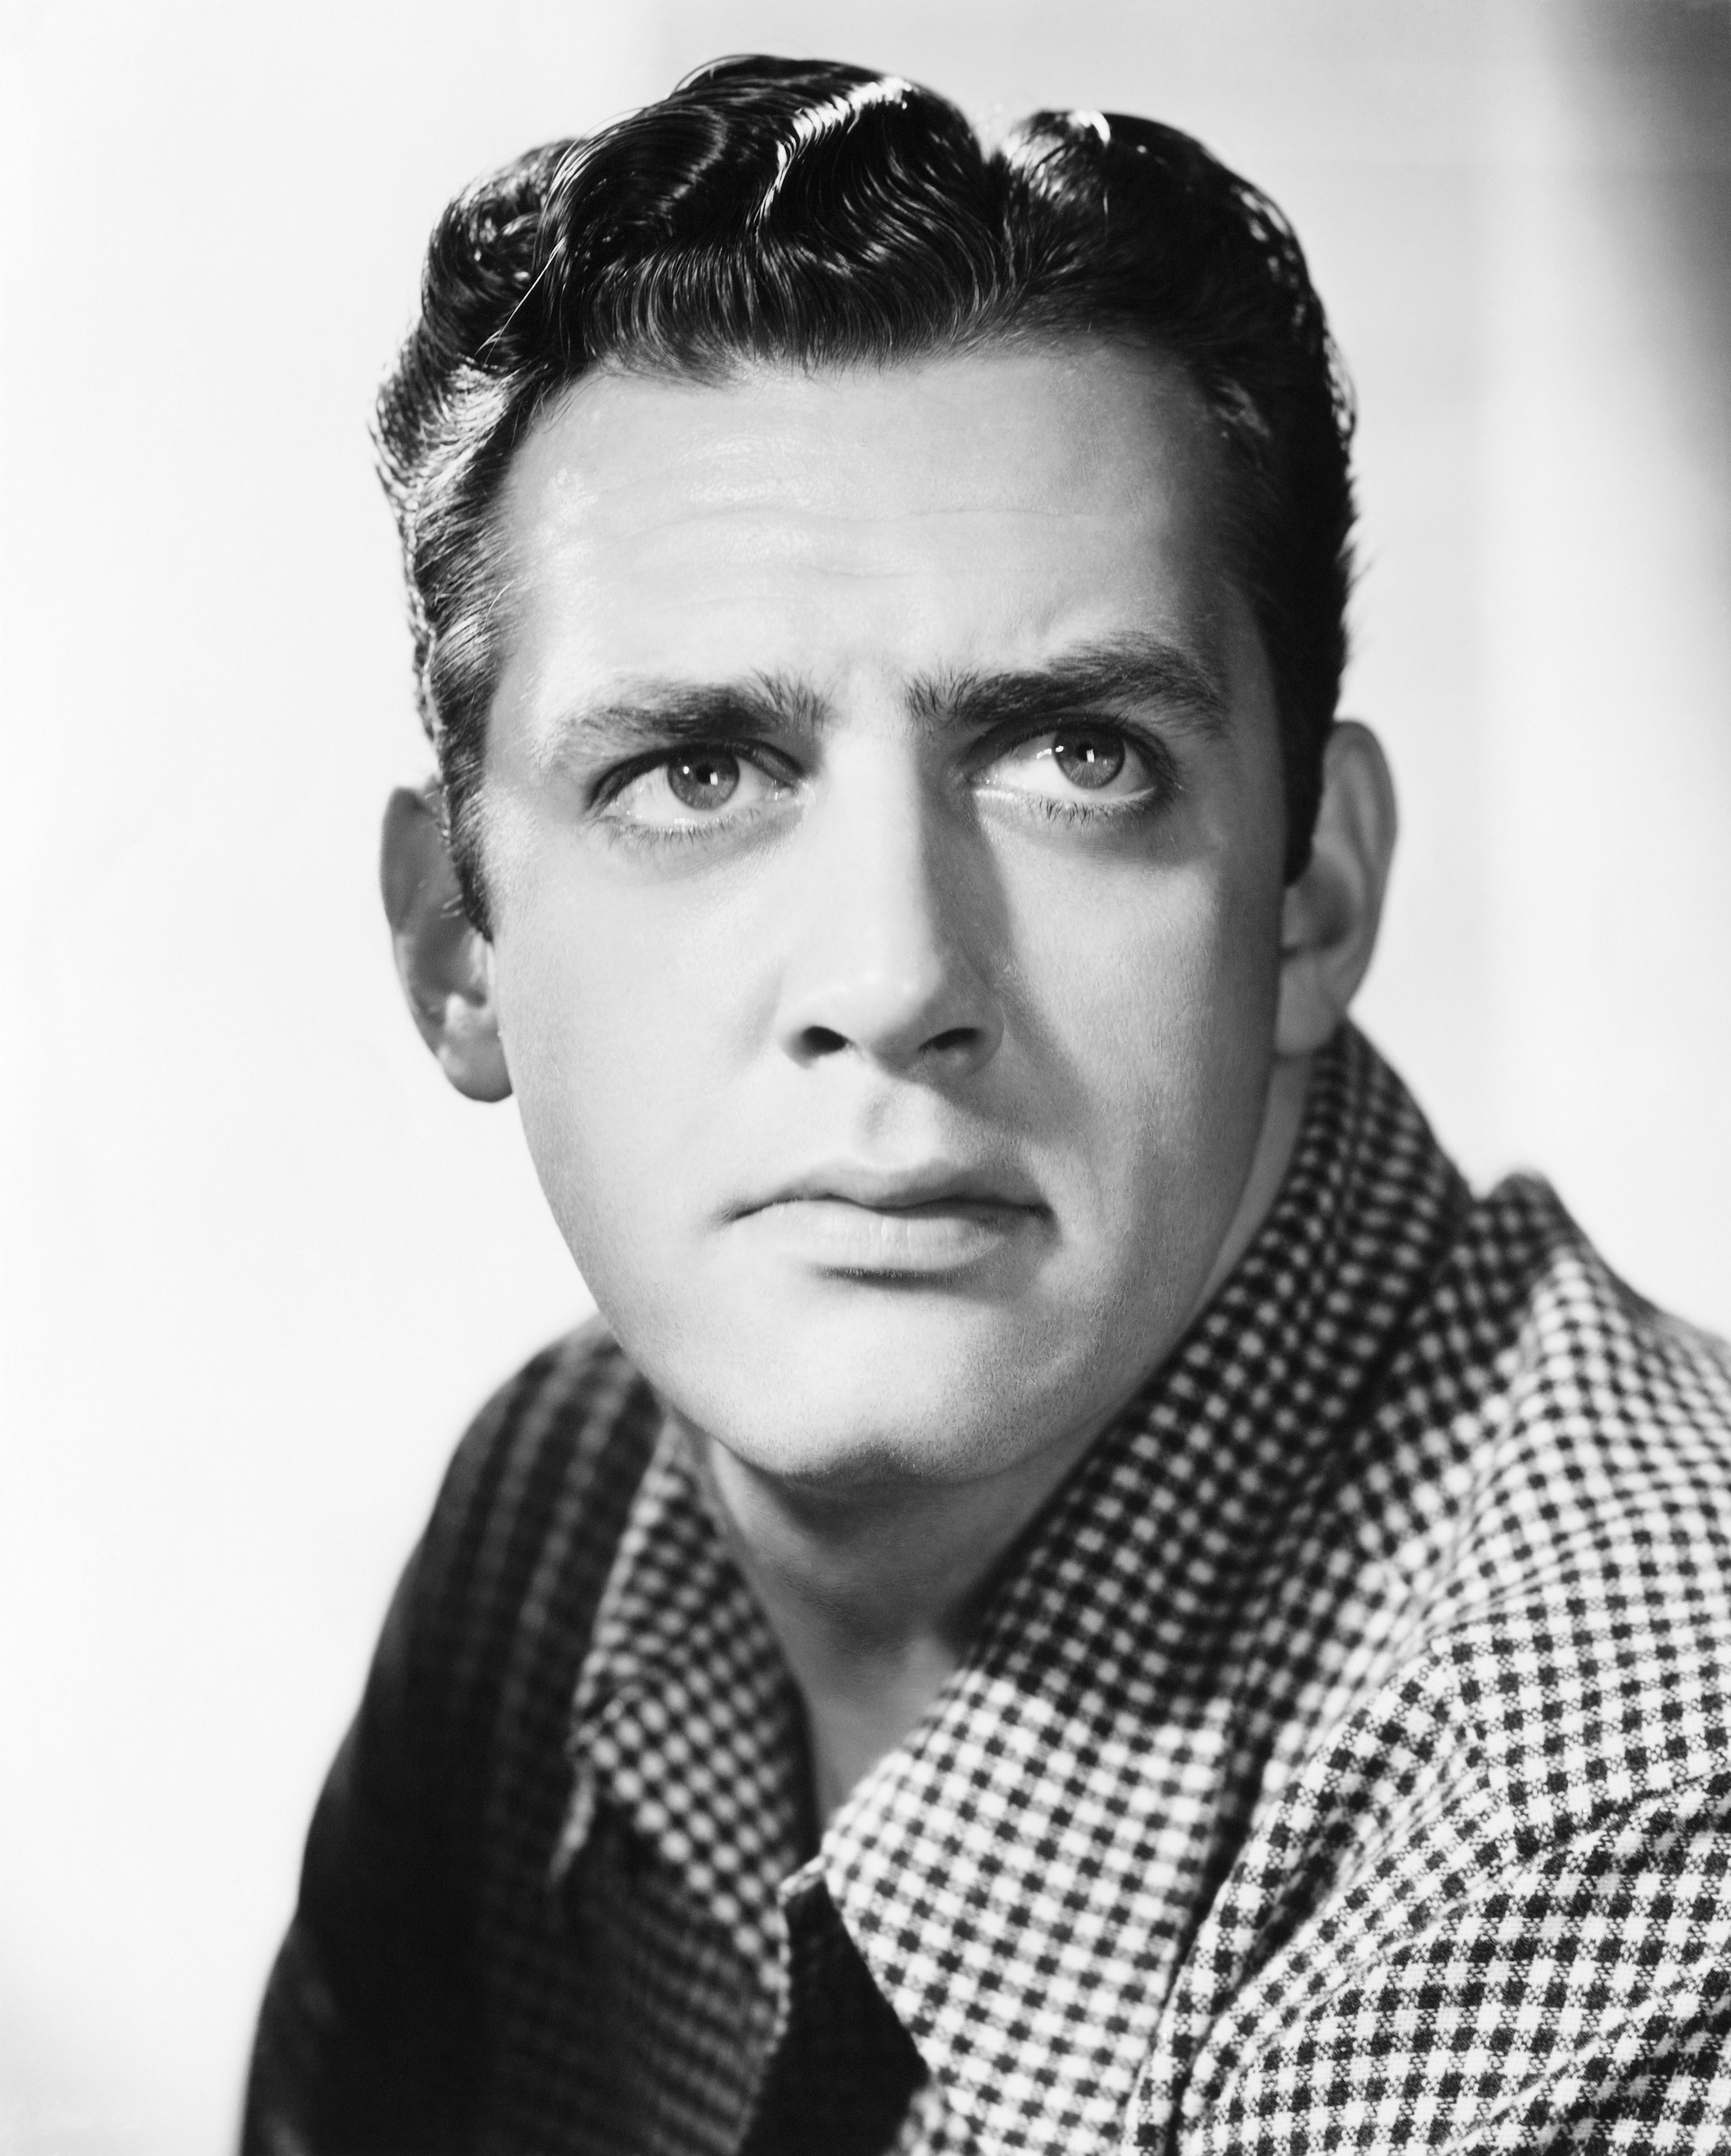 A headshot of television icon Raymond Burr wearing a checkered shirt. / Source: Getty Images